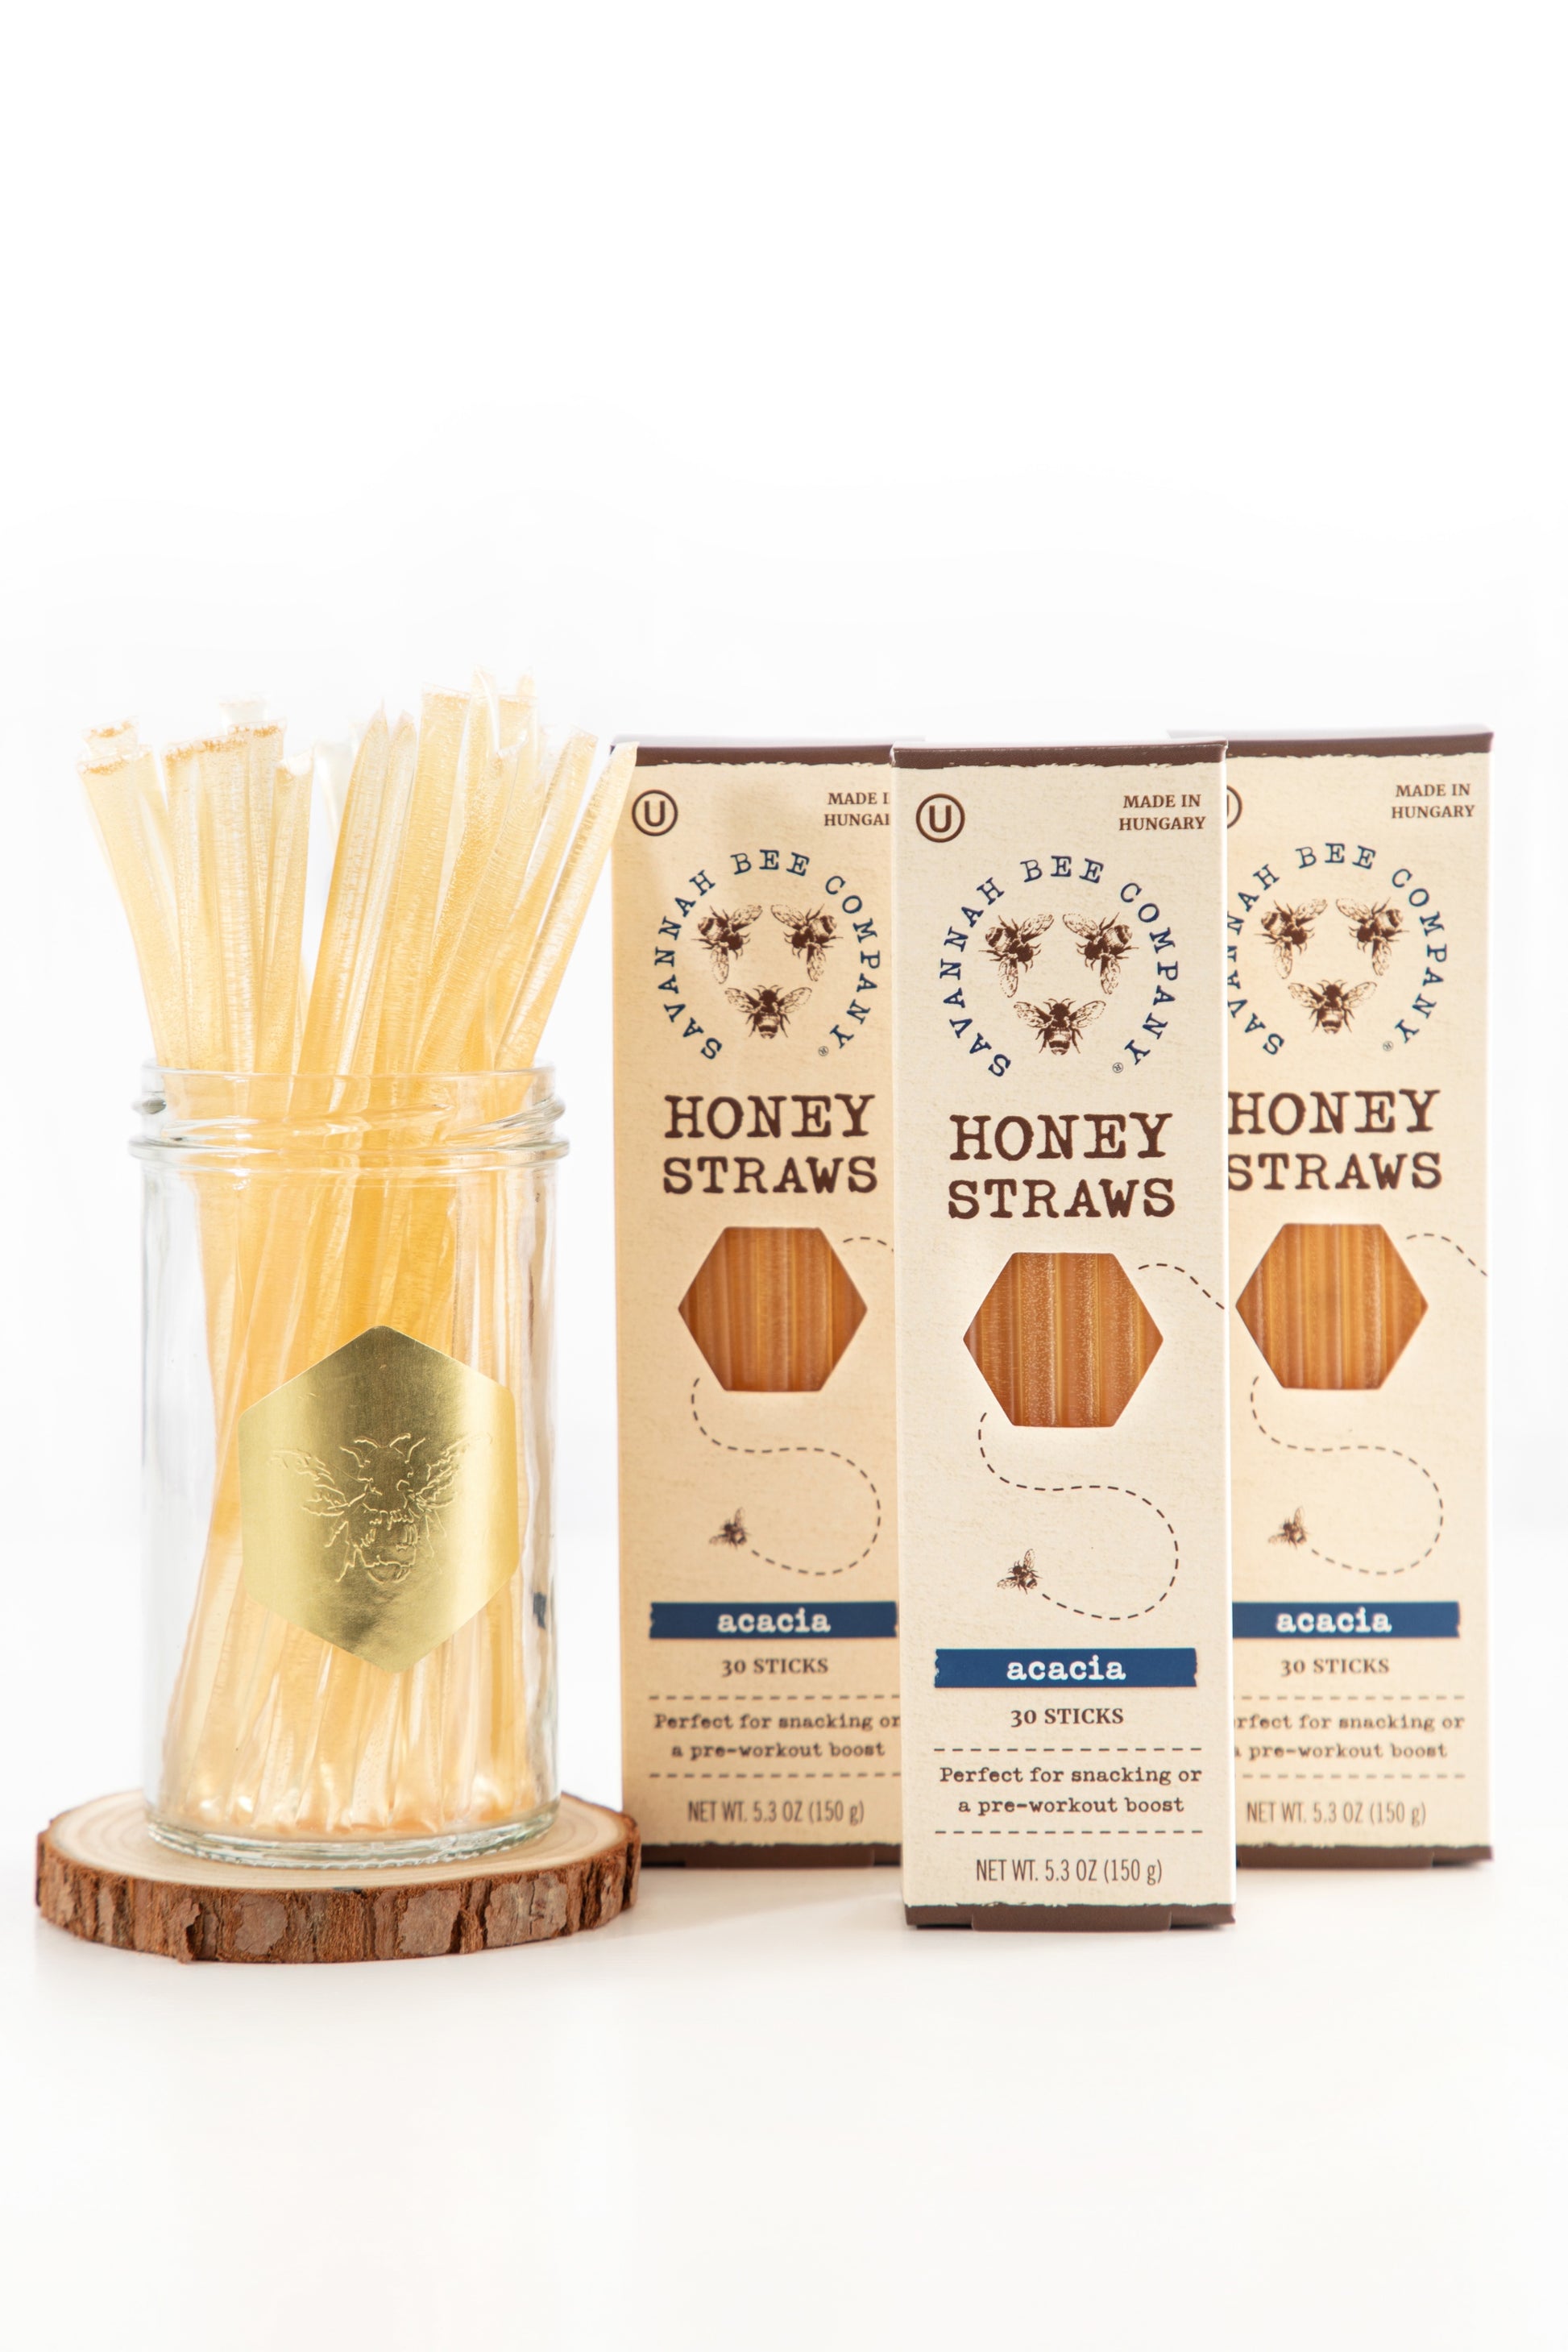 Acacia Honey Straws, comes in a 12, 30 and 50 pack